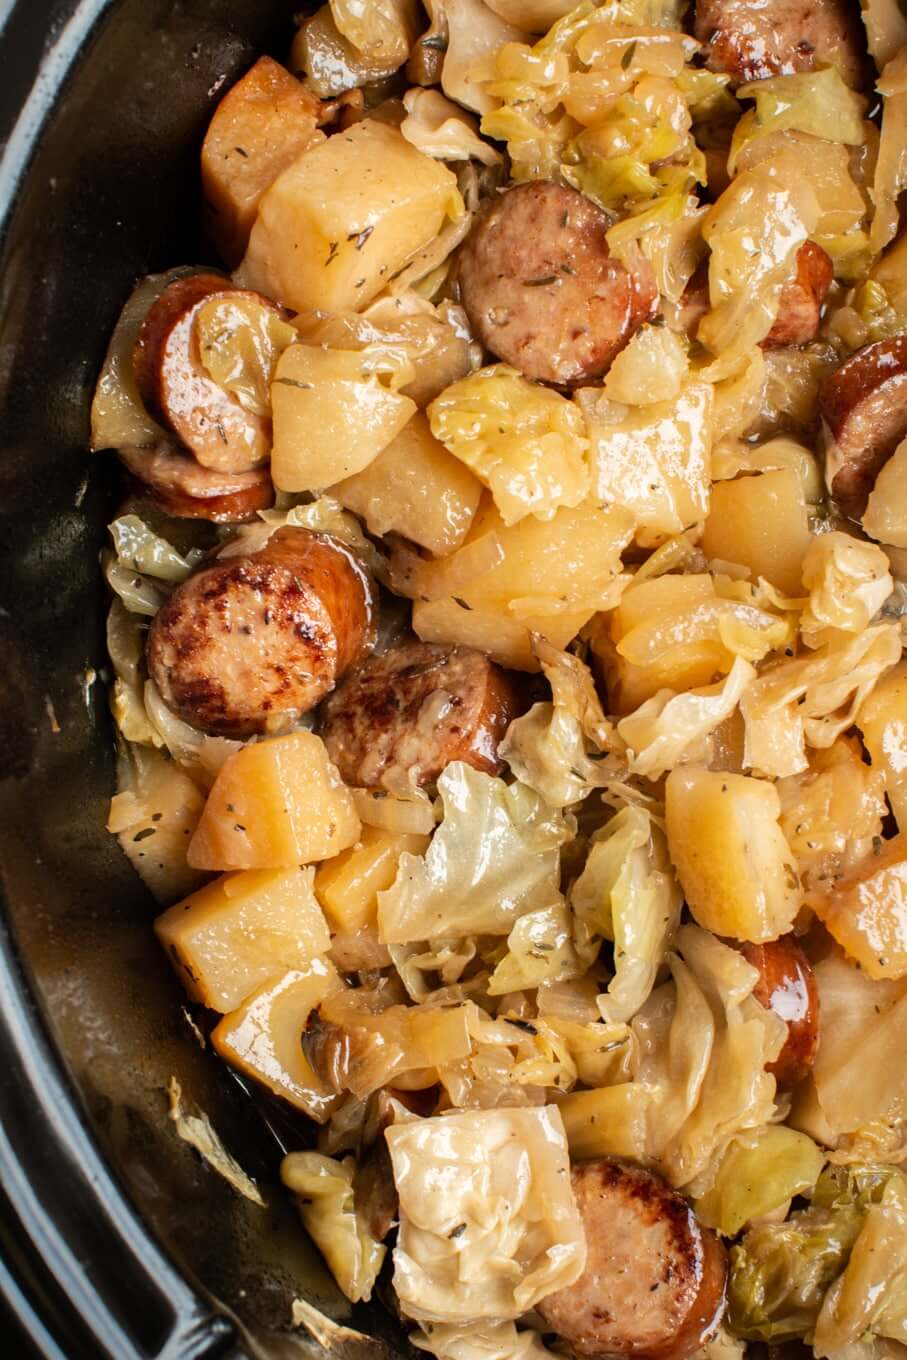 Overhead image of cabbage, potatoes and sliced sausages in slow cooker